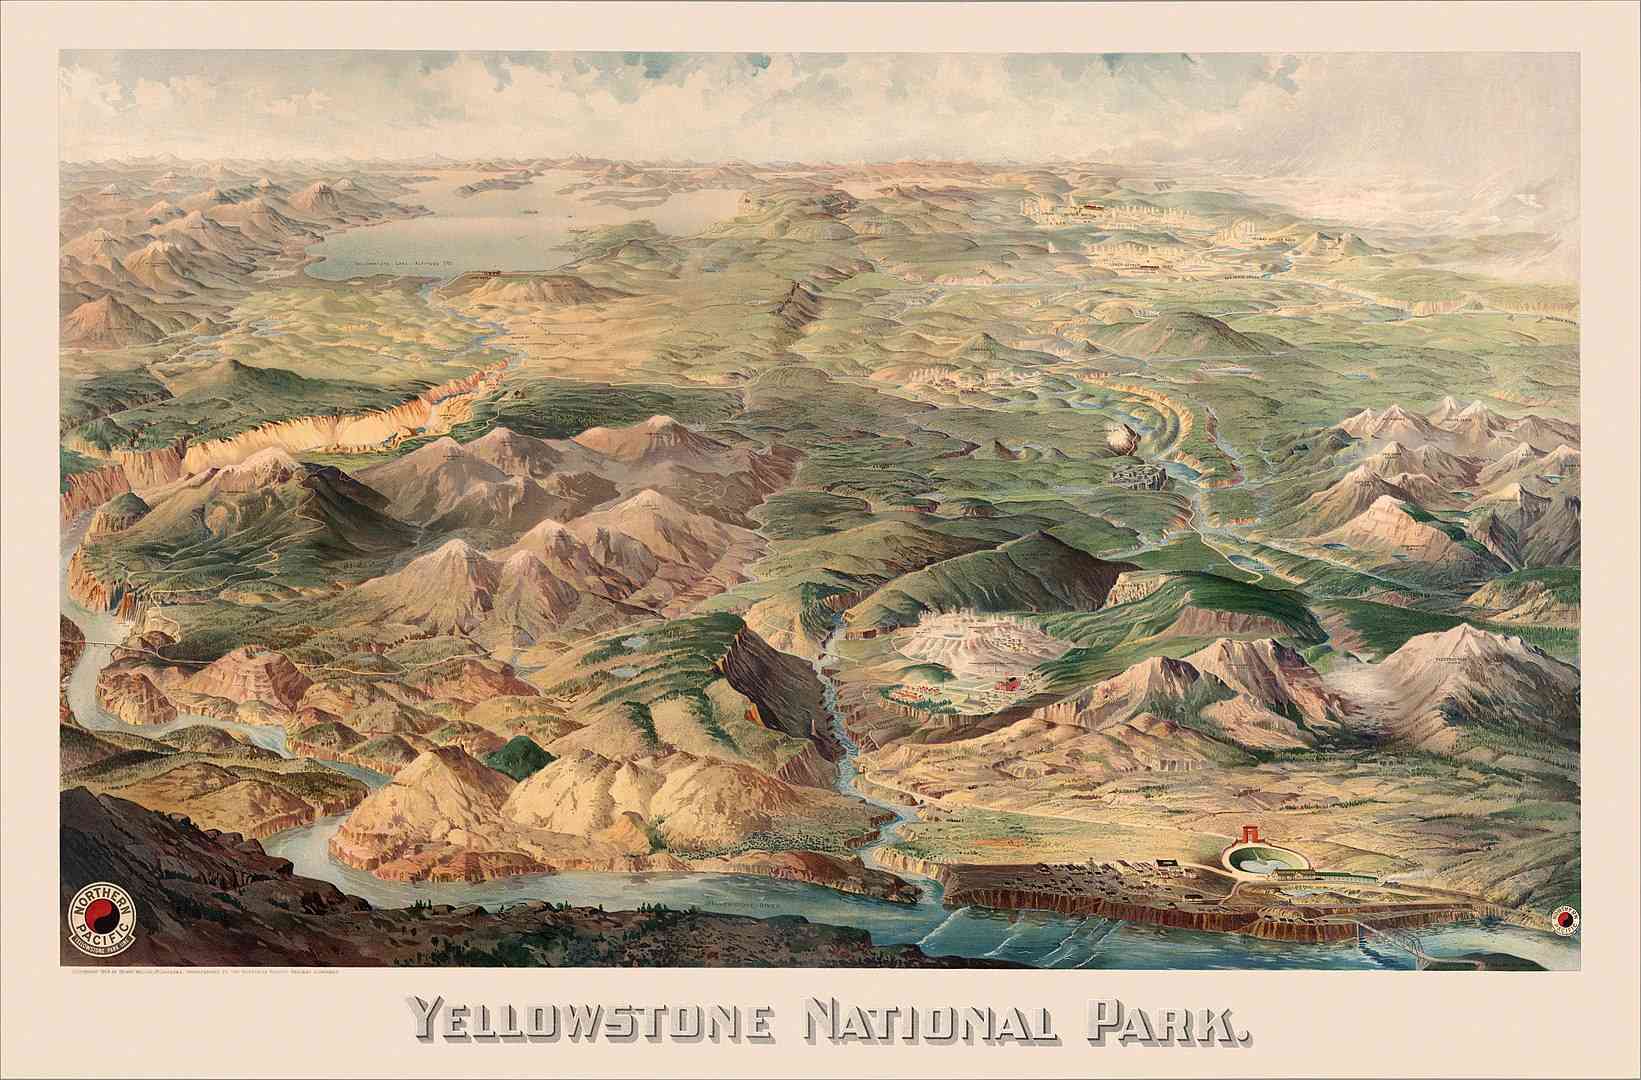 A detailed pictorial map of Yellowstone National Park, by Henry Wellge.